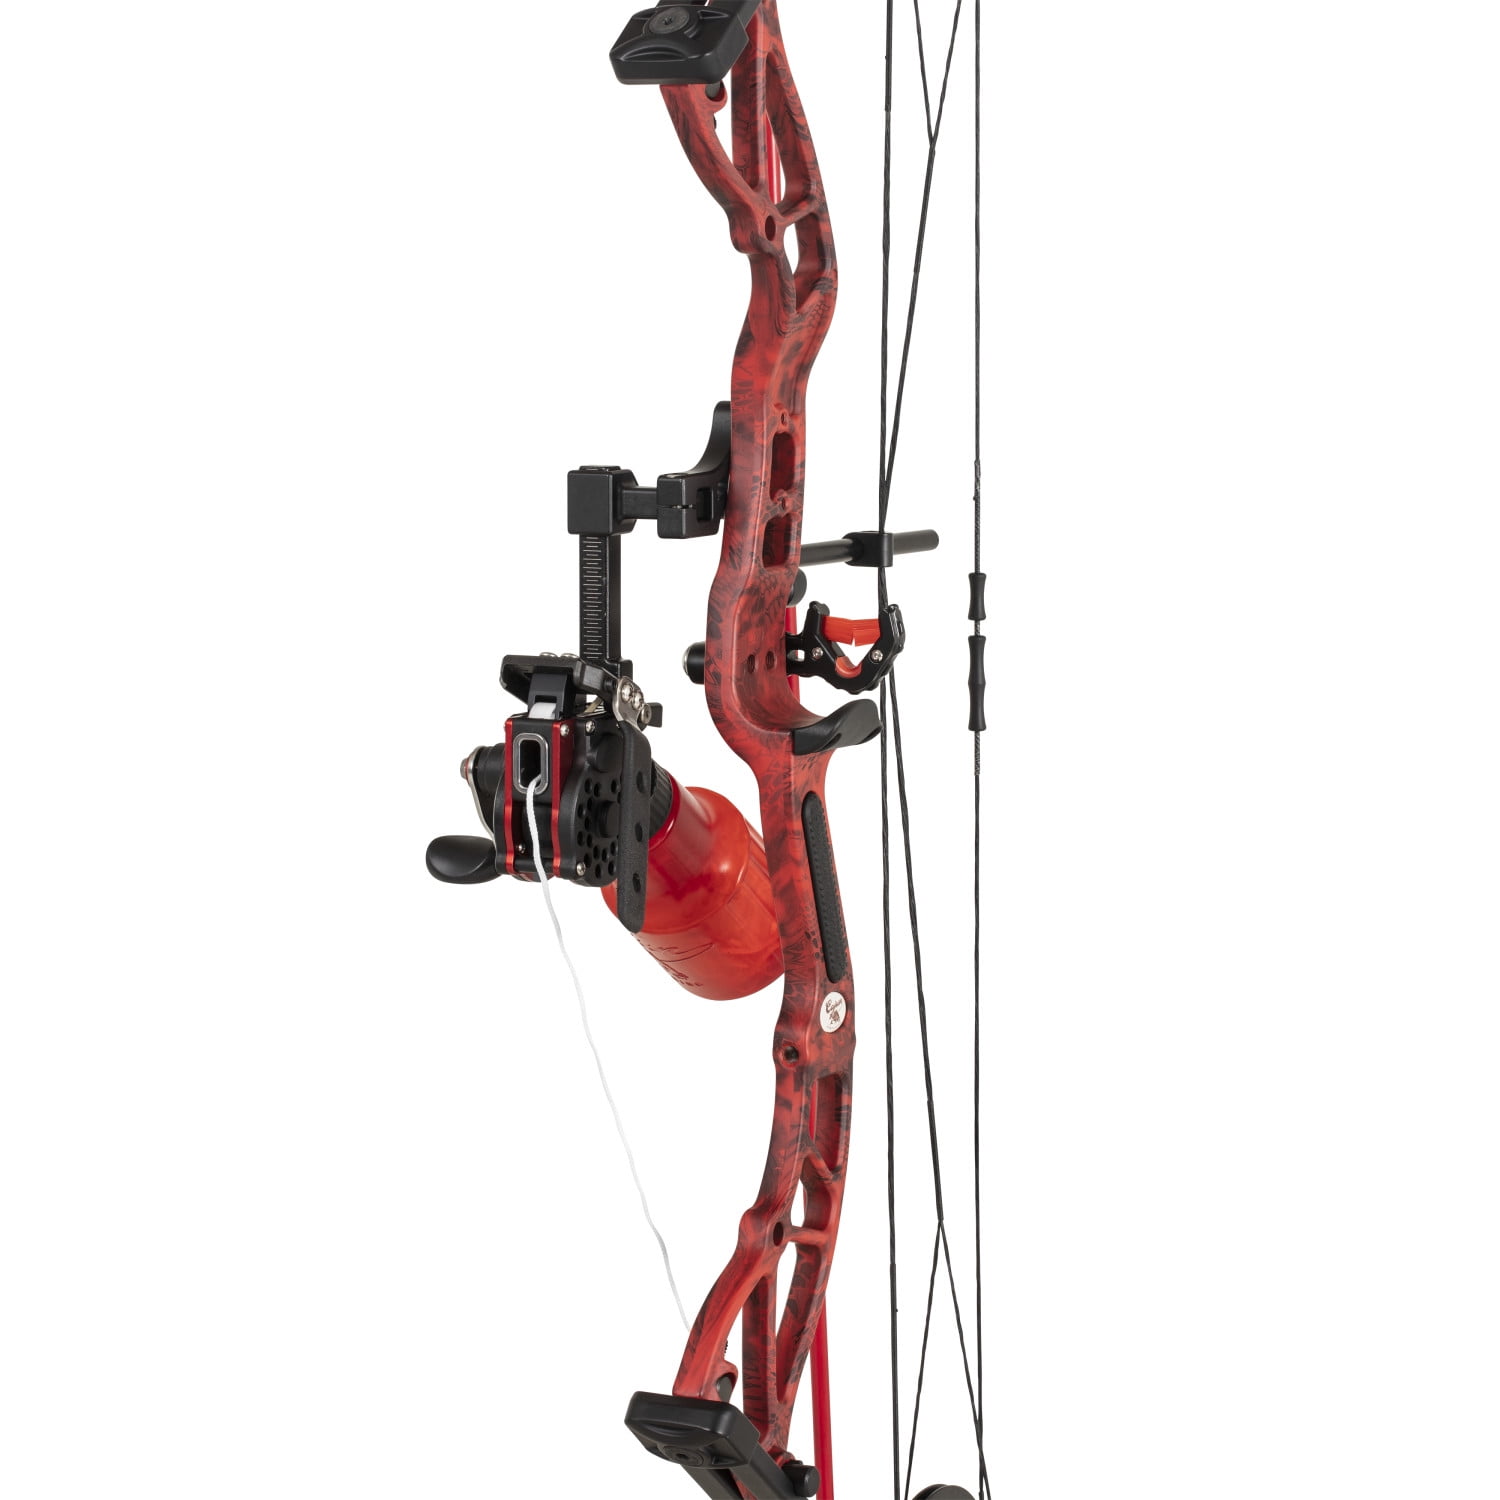 Cajun Bowfishing Shore Runner Ext Compound Bowfishing Bow Ready to Fish Kit  with Brush Fire Arrow Rest, Bowfishing Bottle Reel, Blister Buster Finger  Pads, Fiberglass Arrow 